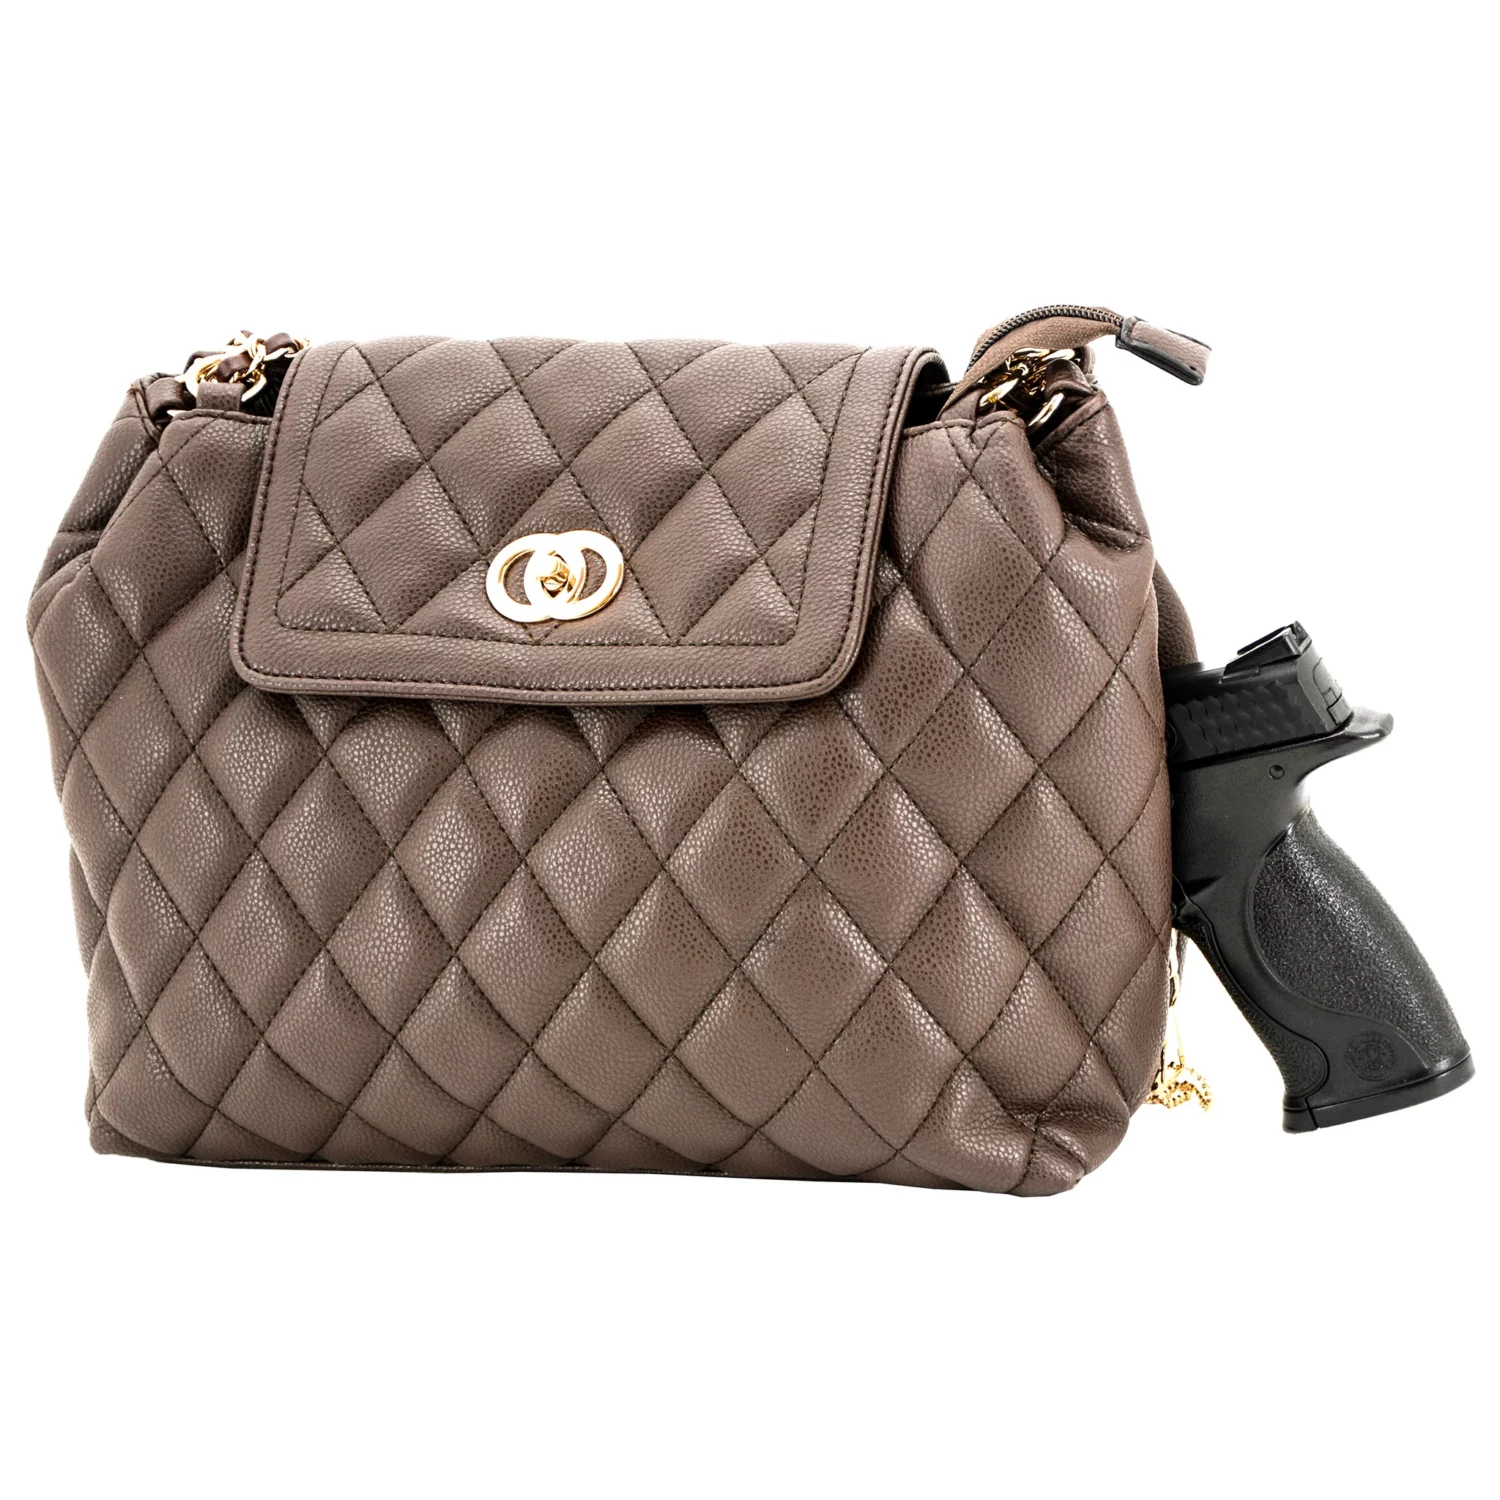 brown quilted concealed carry purse with center CCW compartment